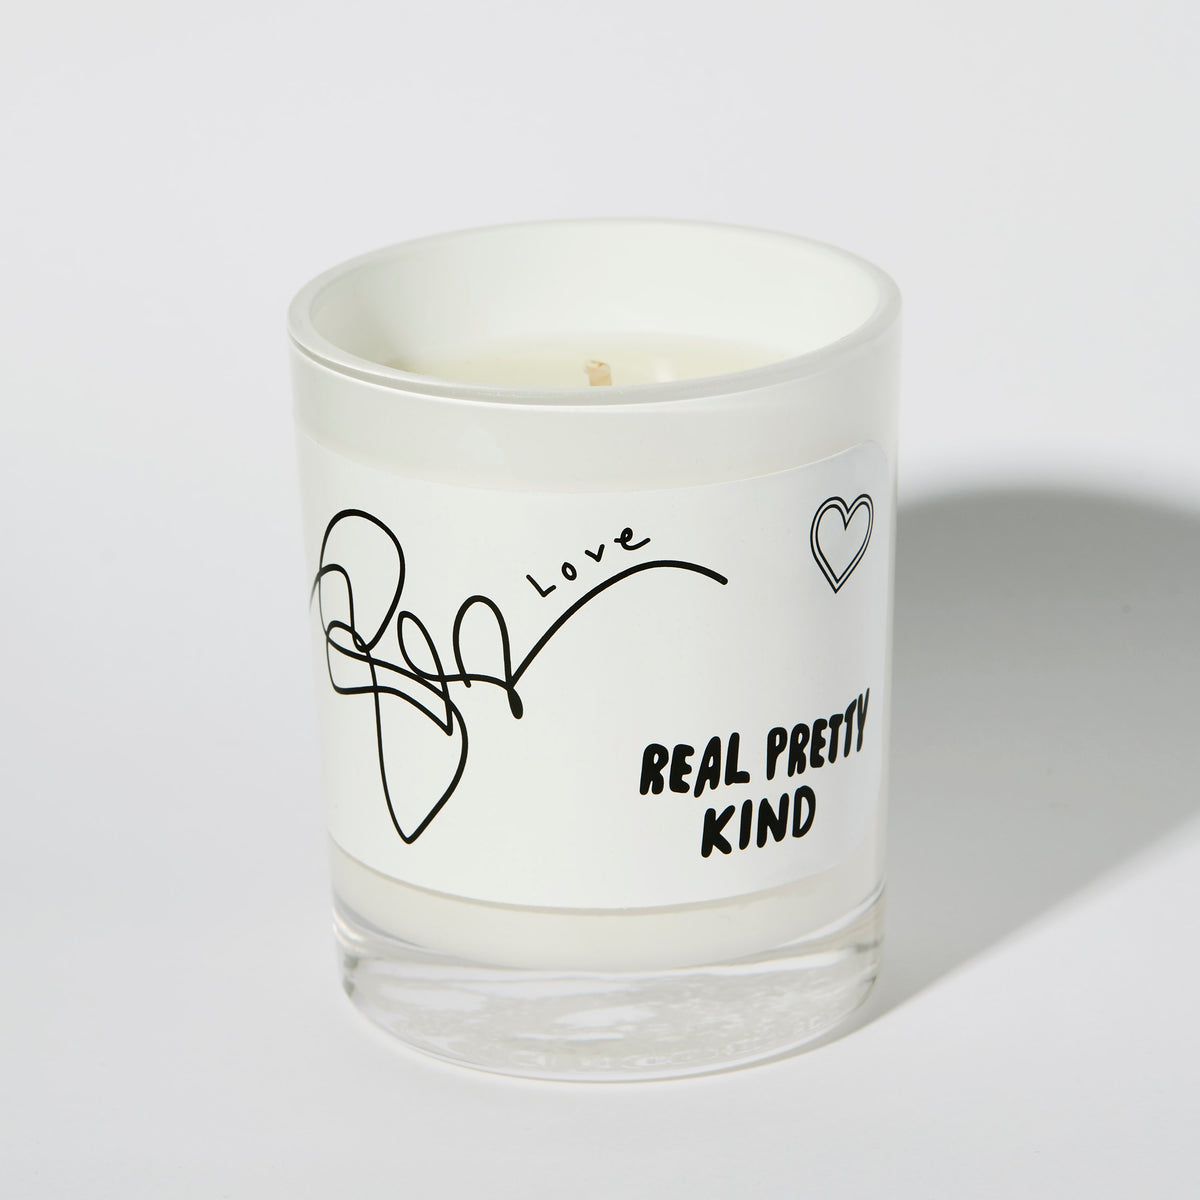 ESSENTIAL OIL INFUSED CANDLES - PEACE